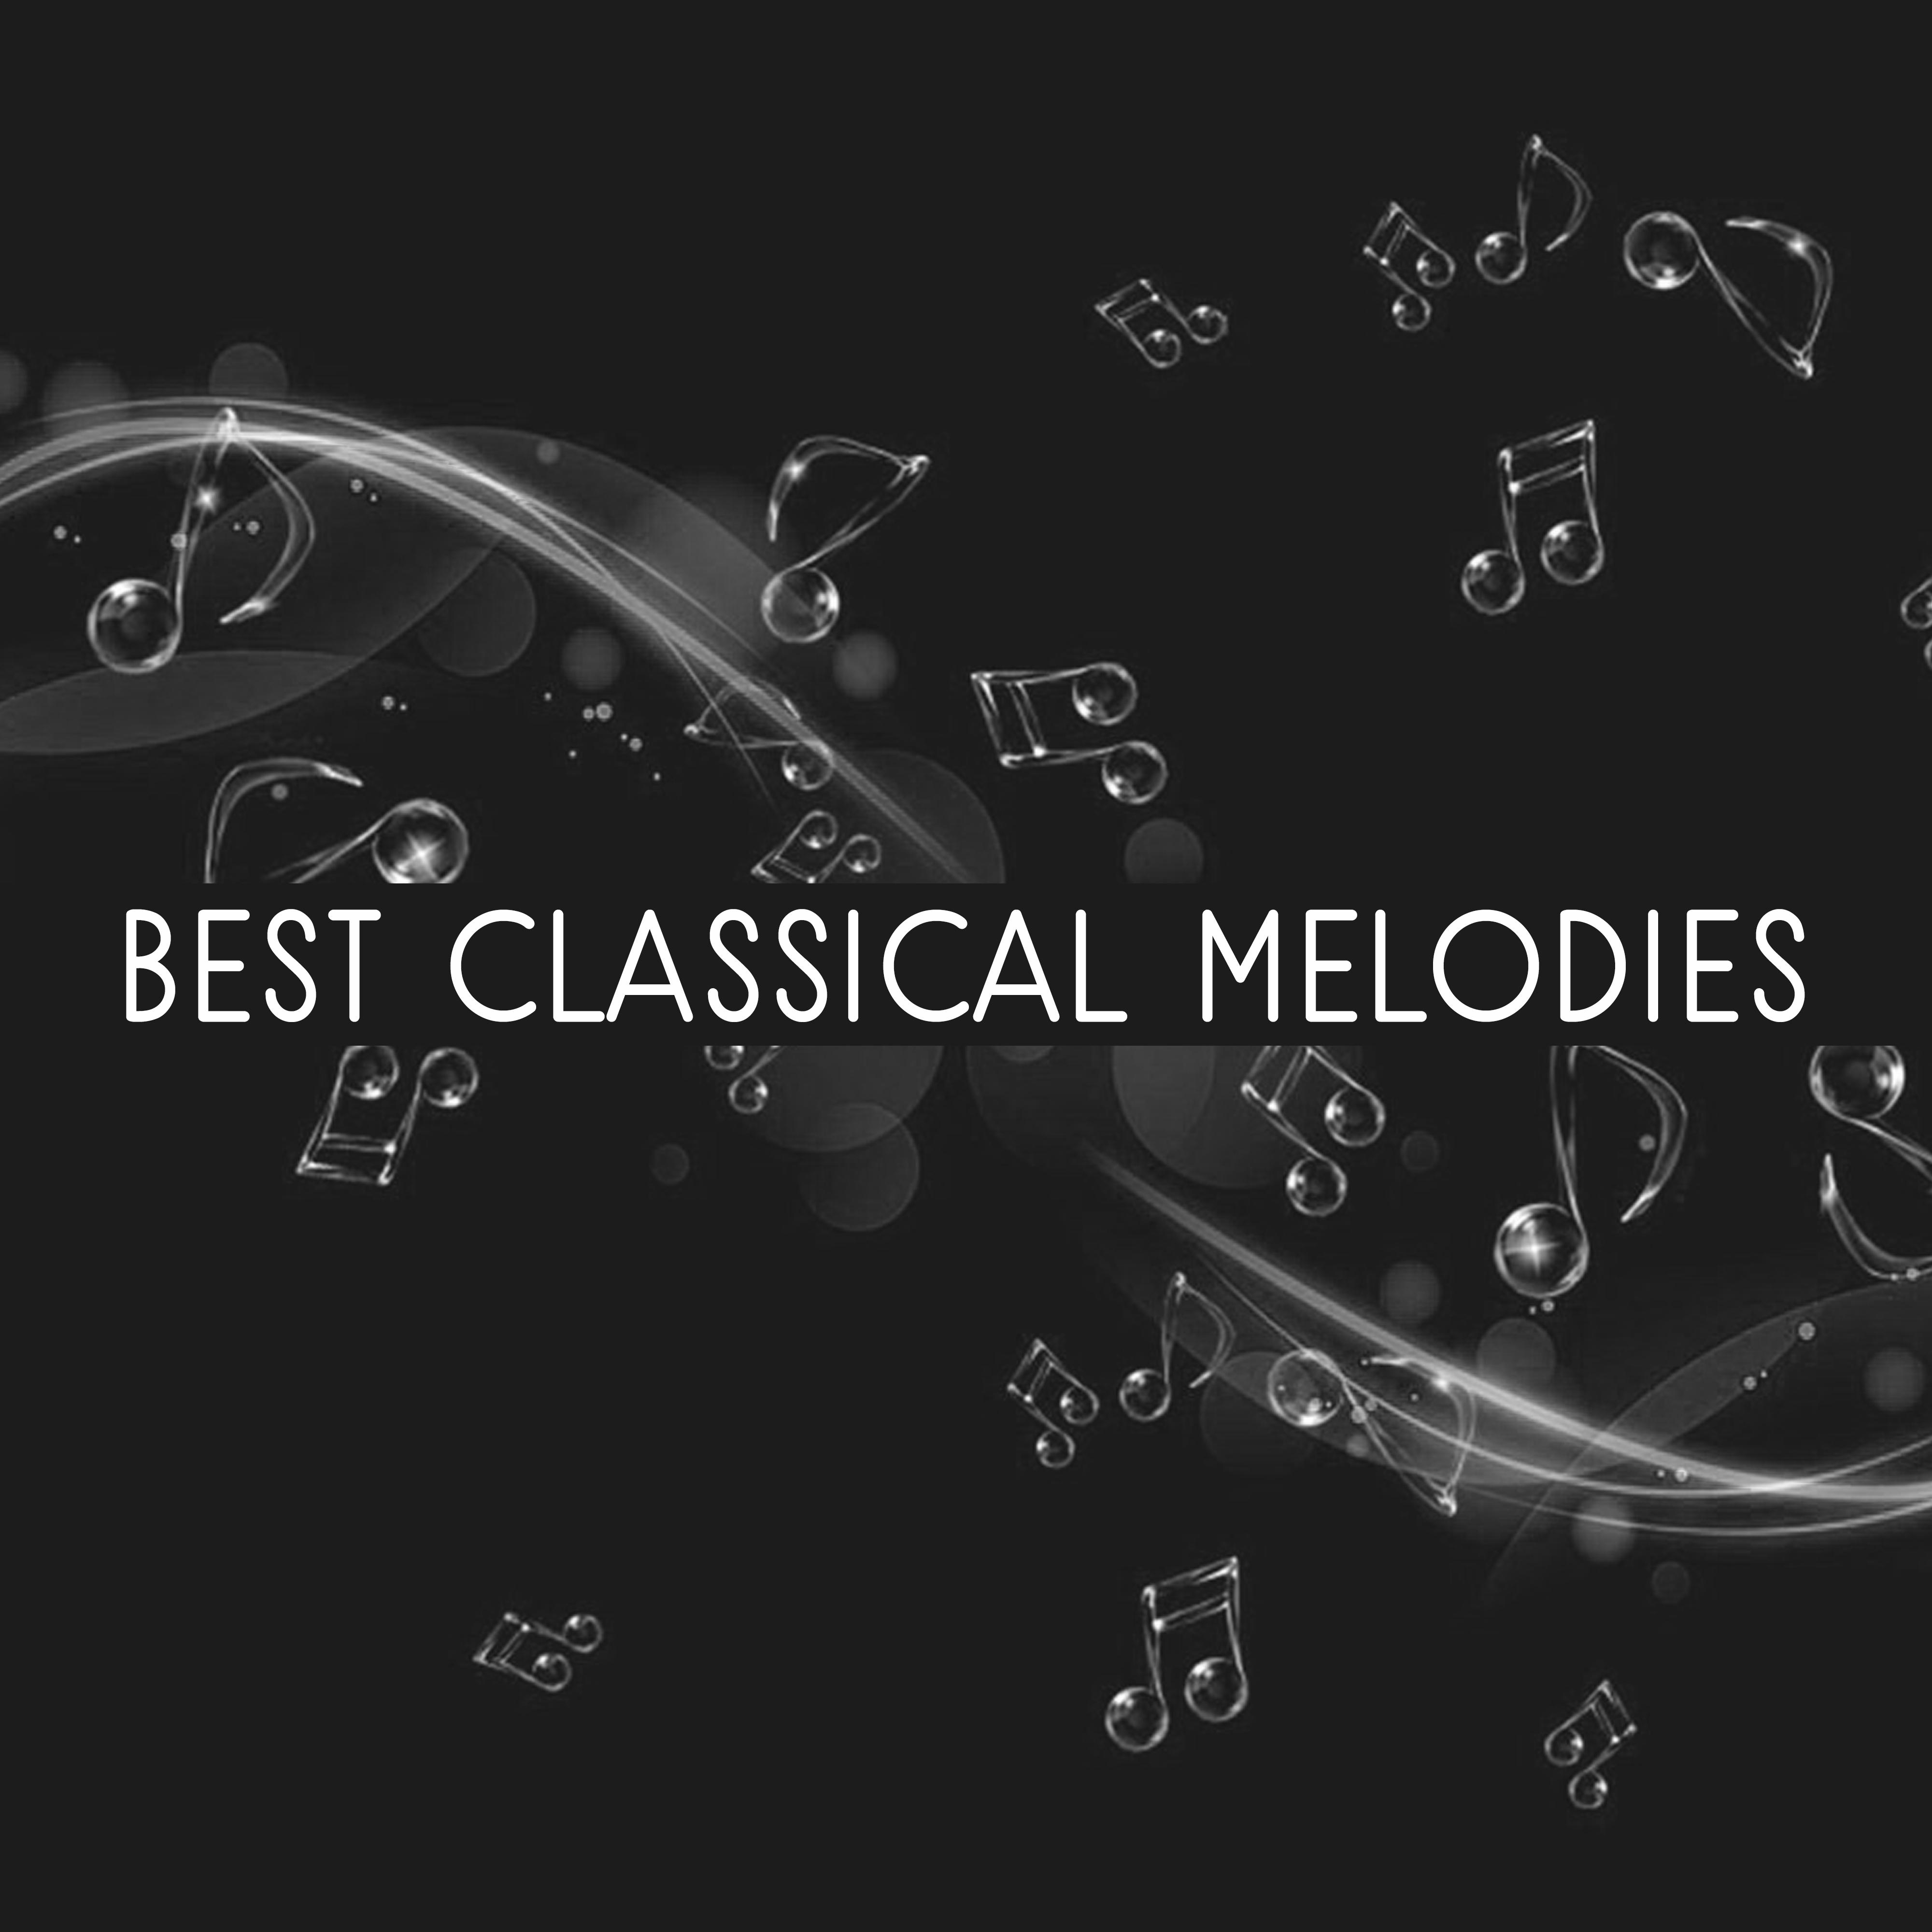 Best Classical Melodies  Soft Classics Music, Easy Listening Sounds, Rest with Great Composers